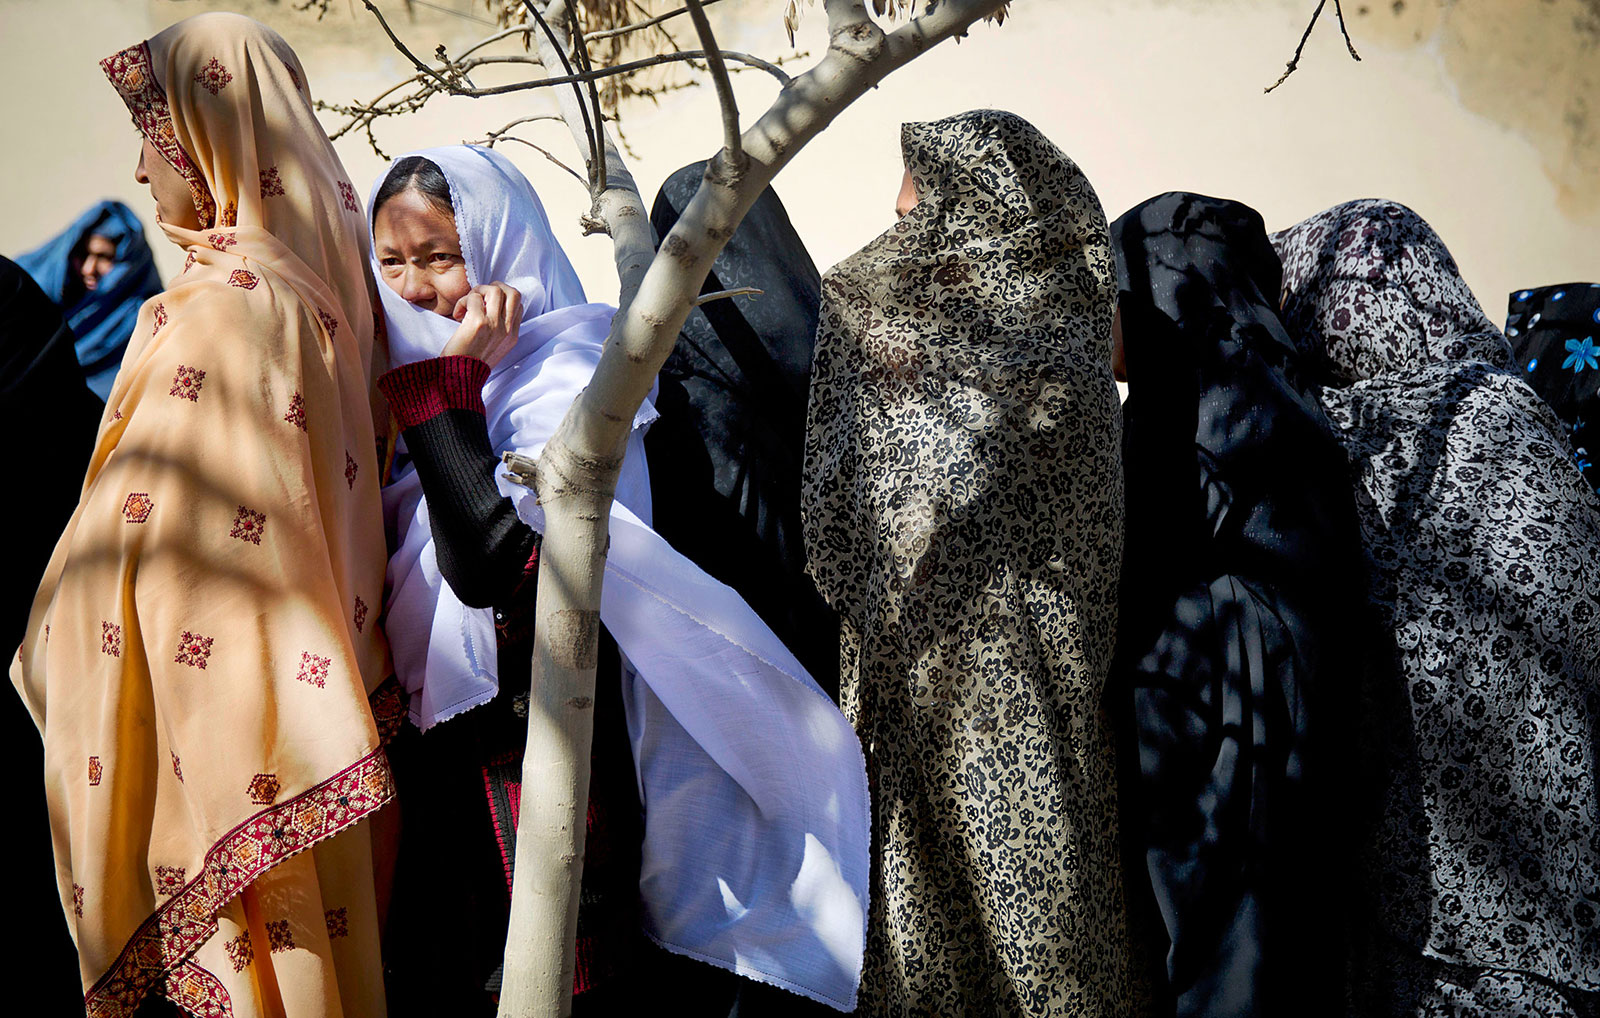 Afghan women turn out to vote in the first democratic transfer of power the country has ever seen. 2014